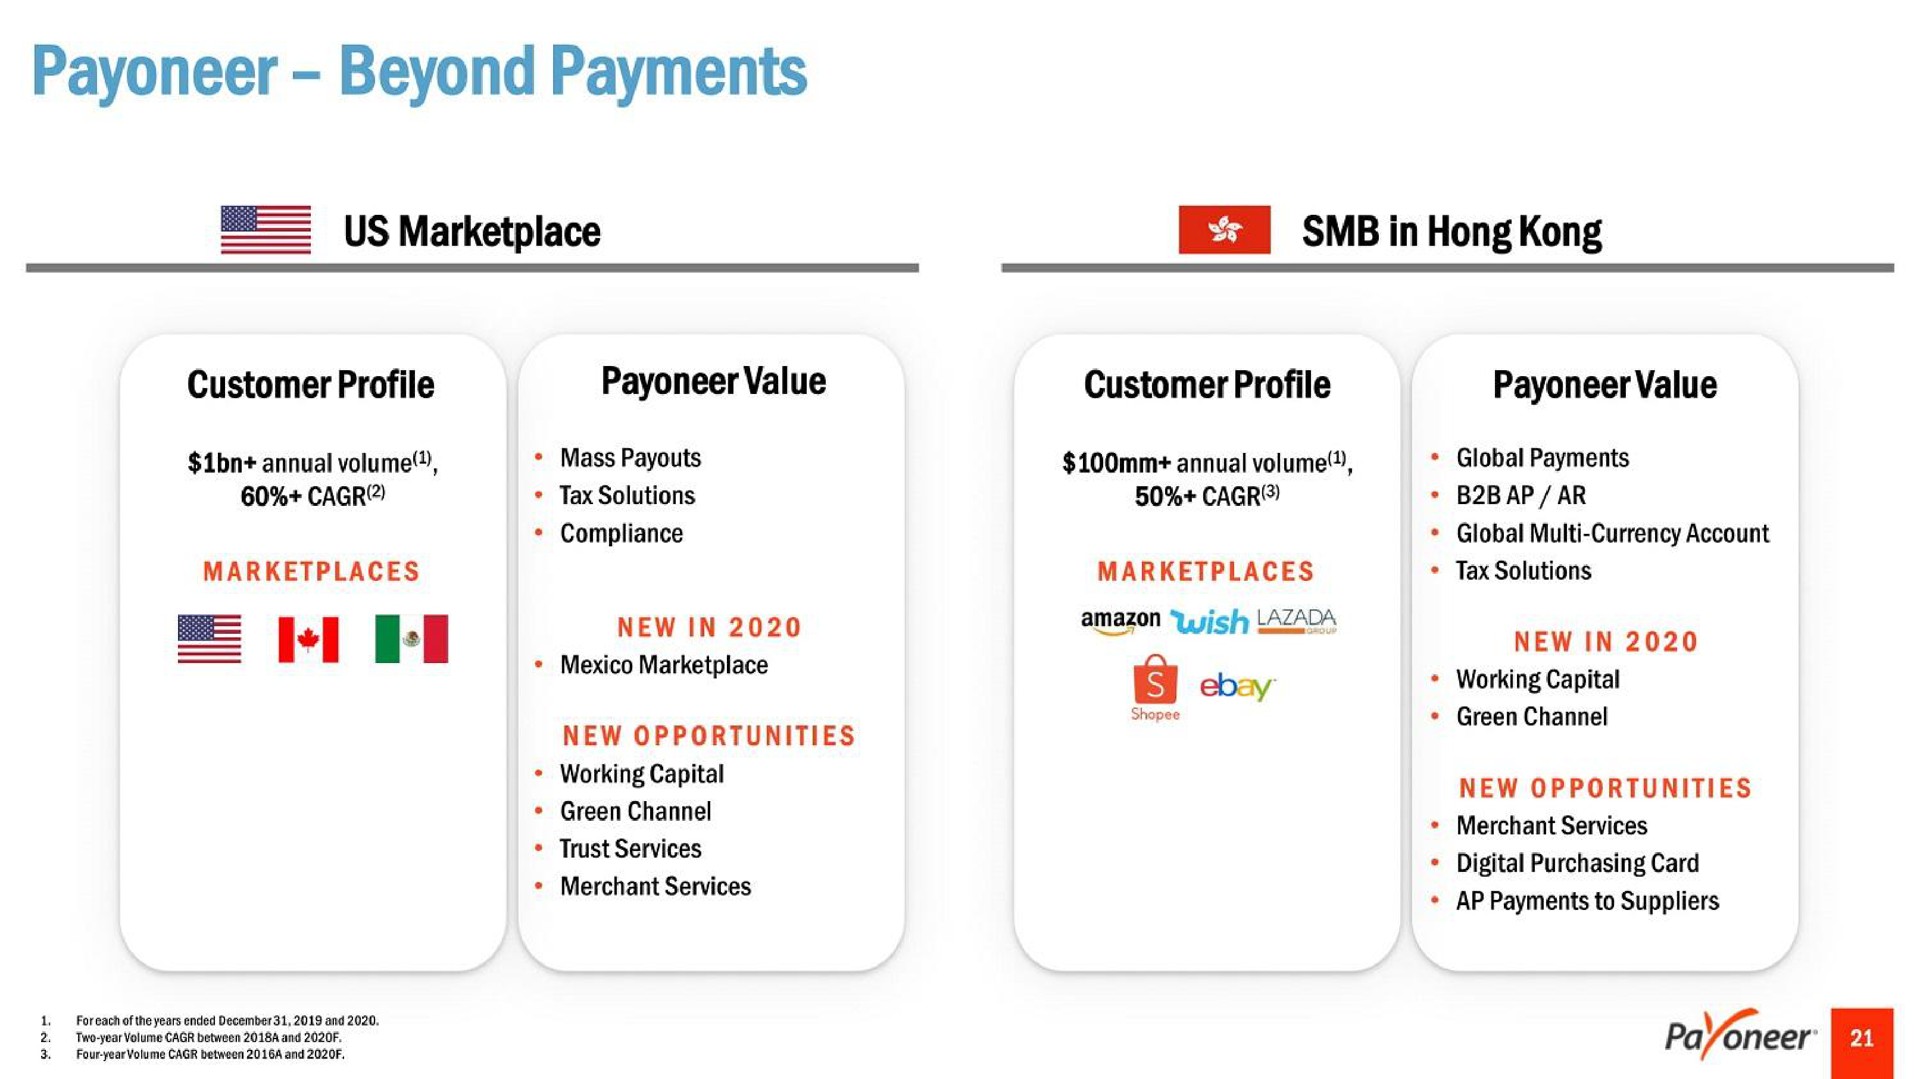 beyond payments in hong i | Payoneer